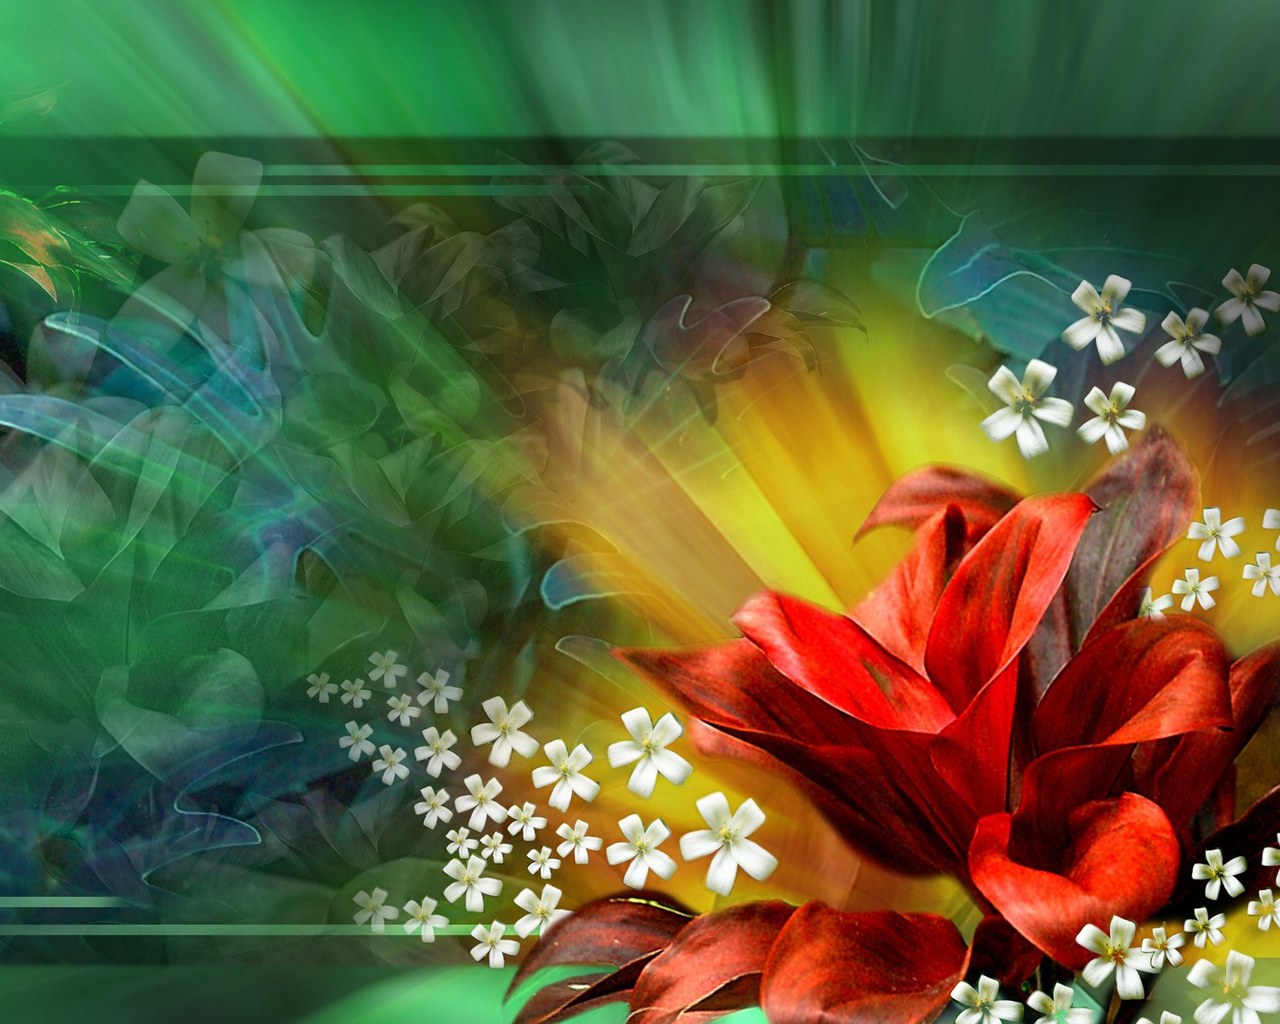  Desktop 3D Animated Background Wallpapers And Screensavers your pc